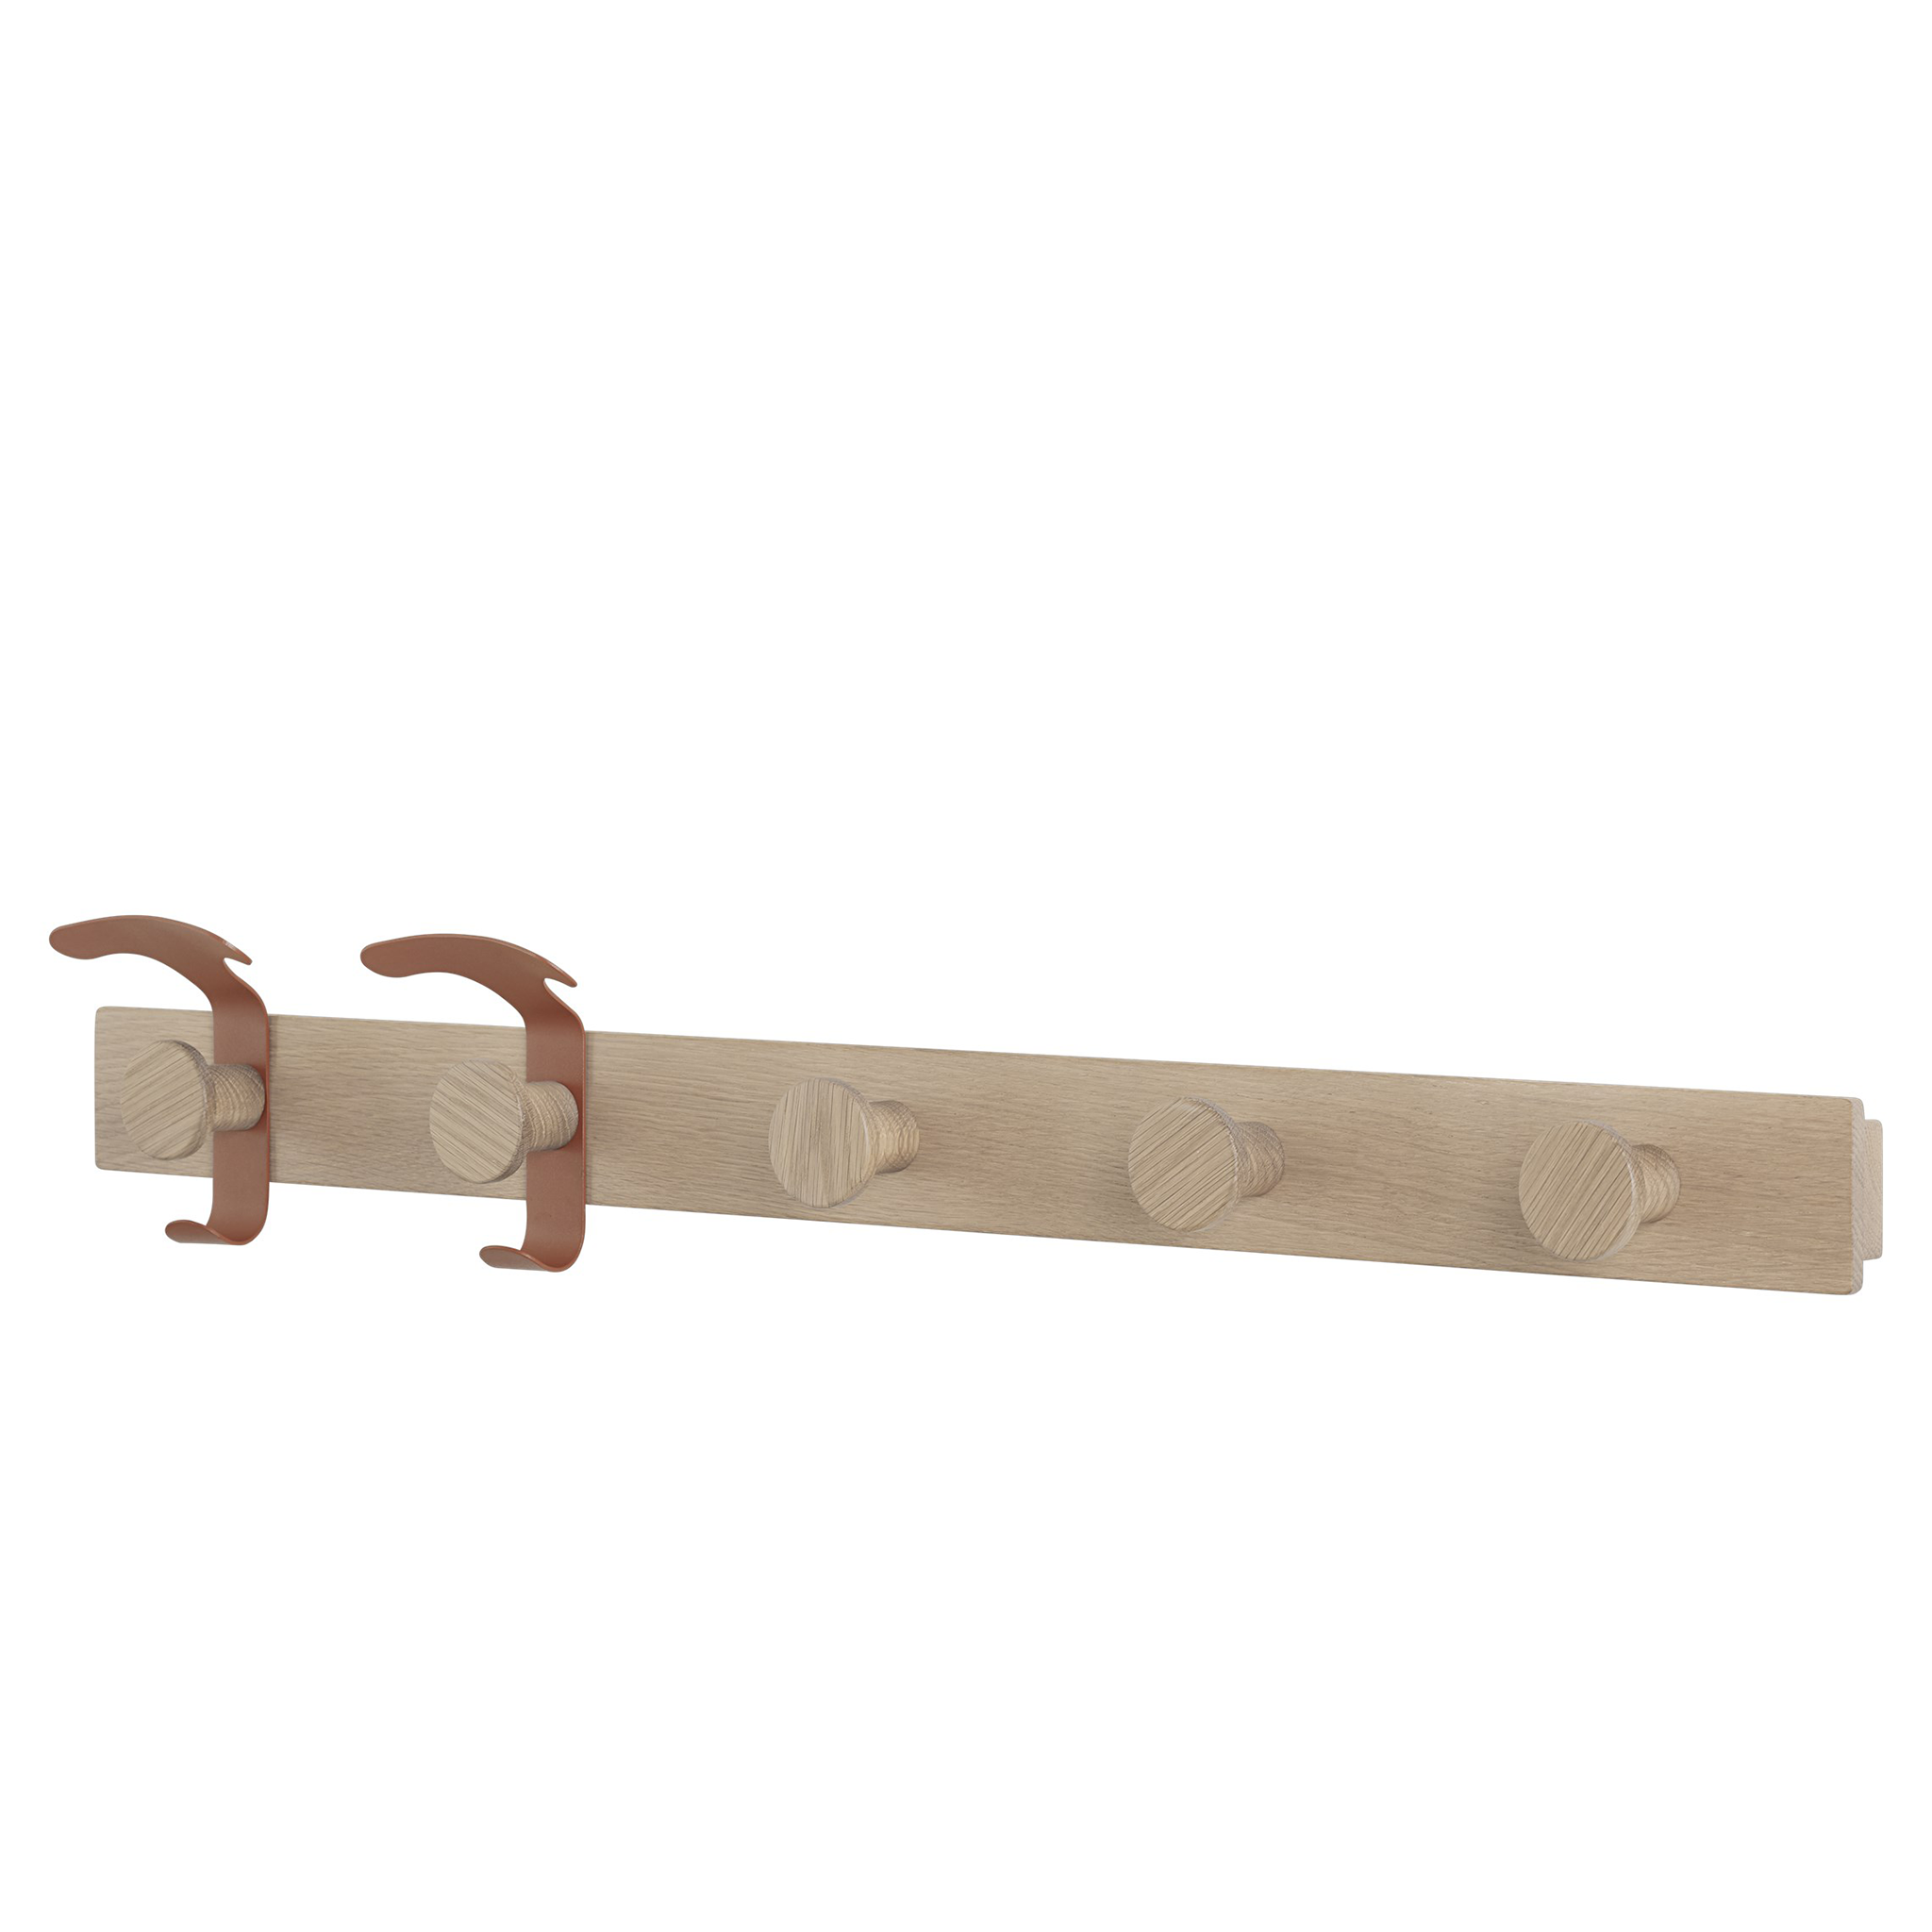 Avail Coat Rack by Sam Hect & Kim Collin for Muuto